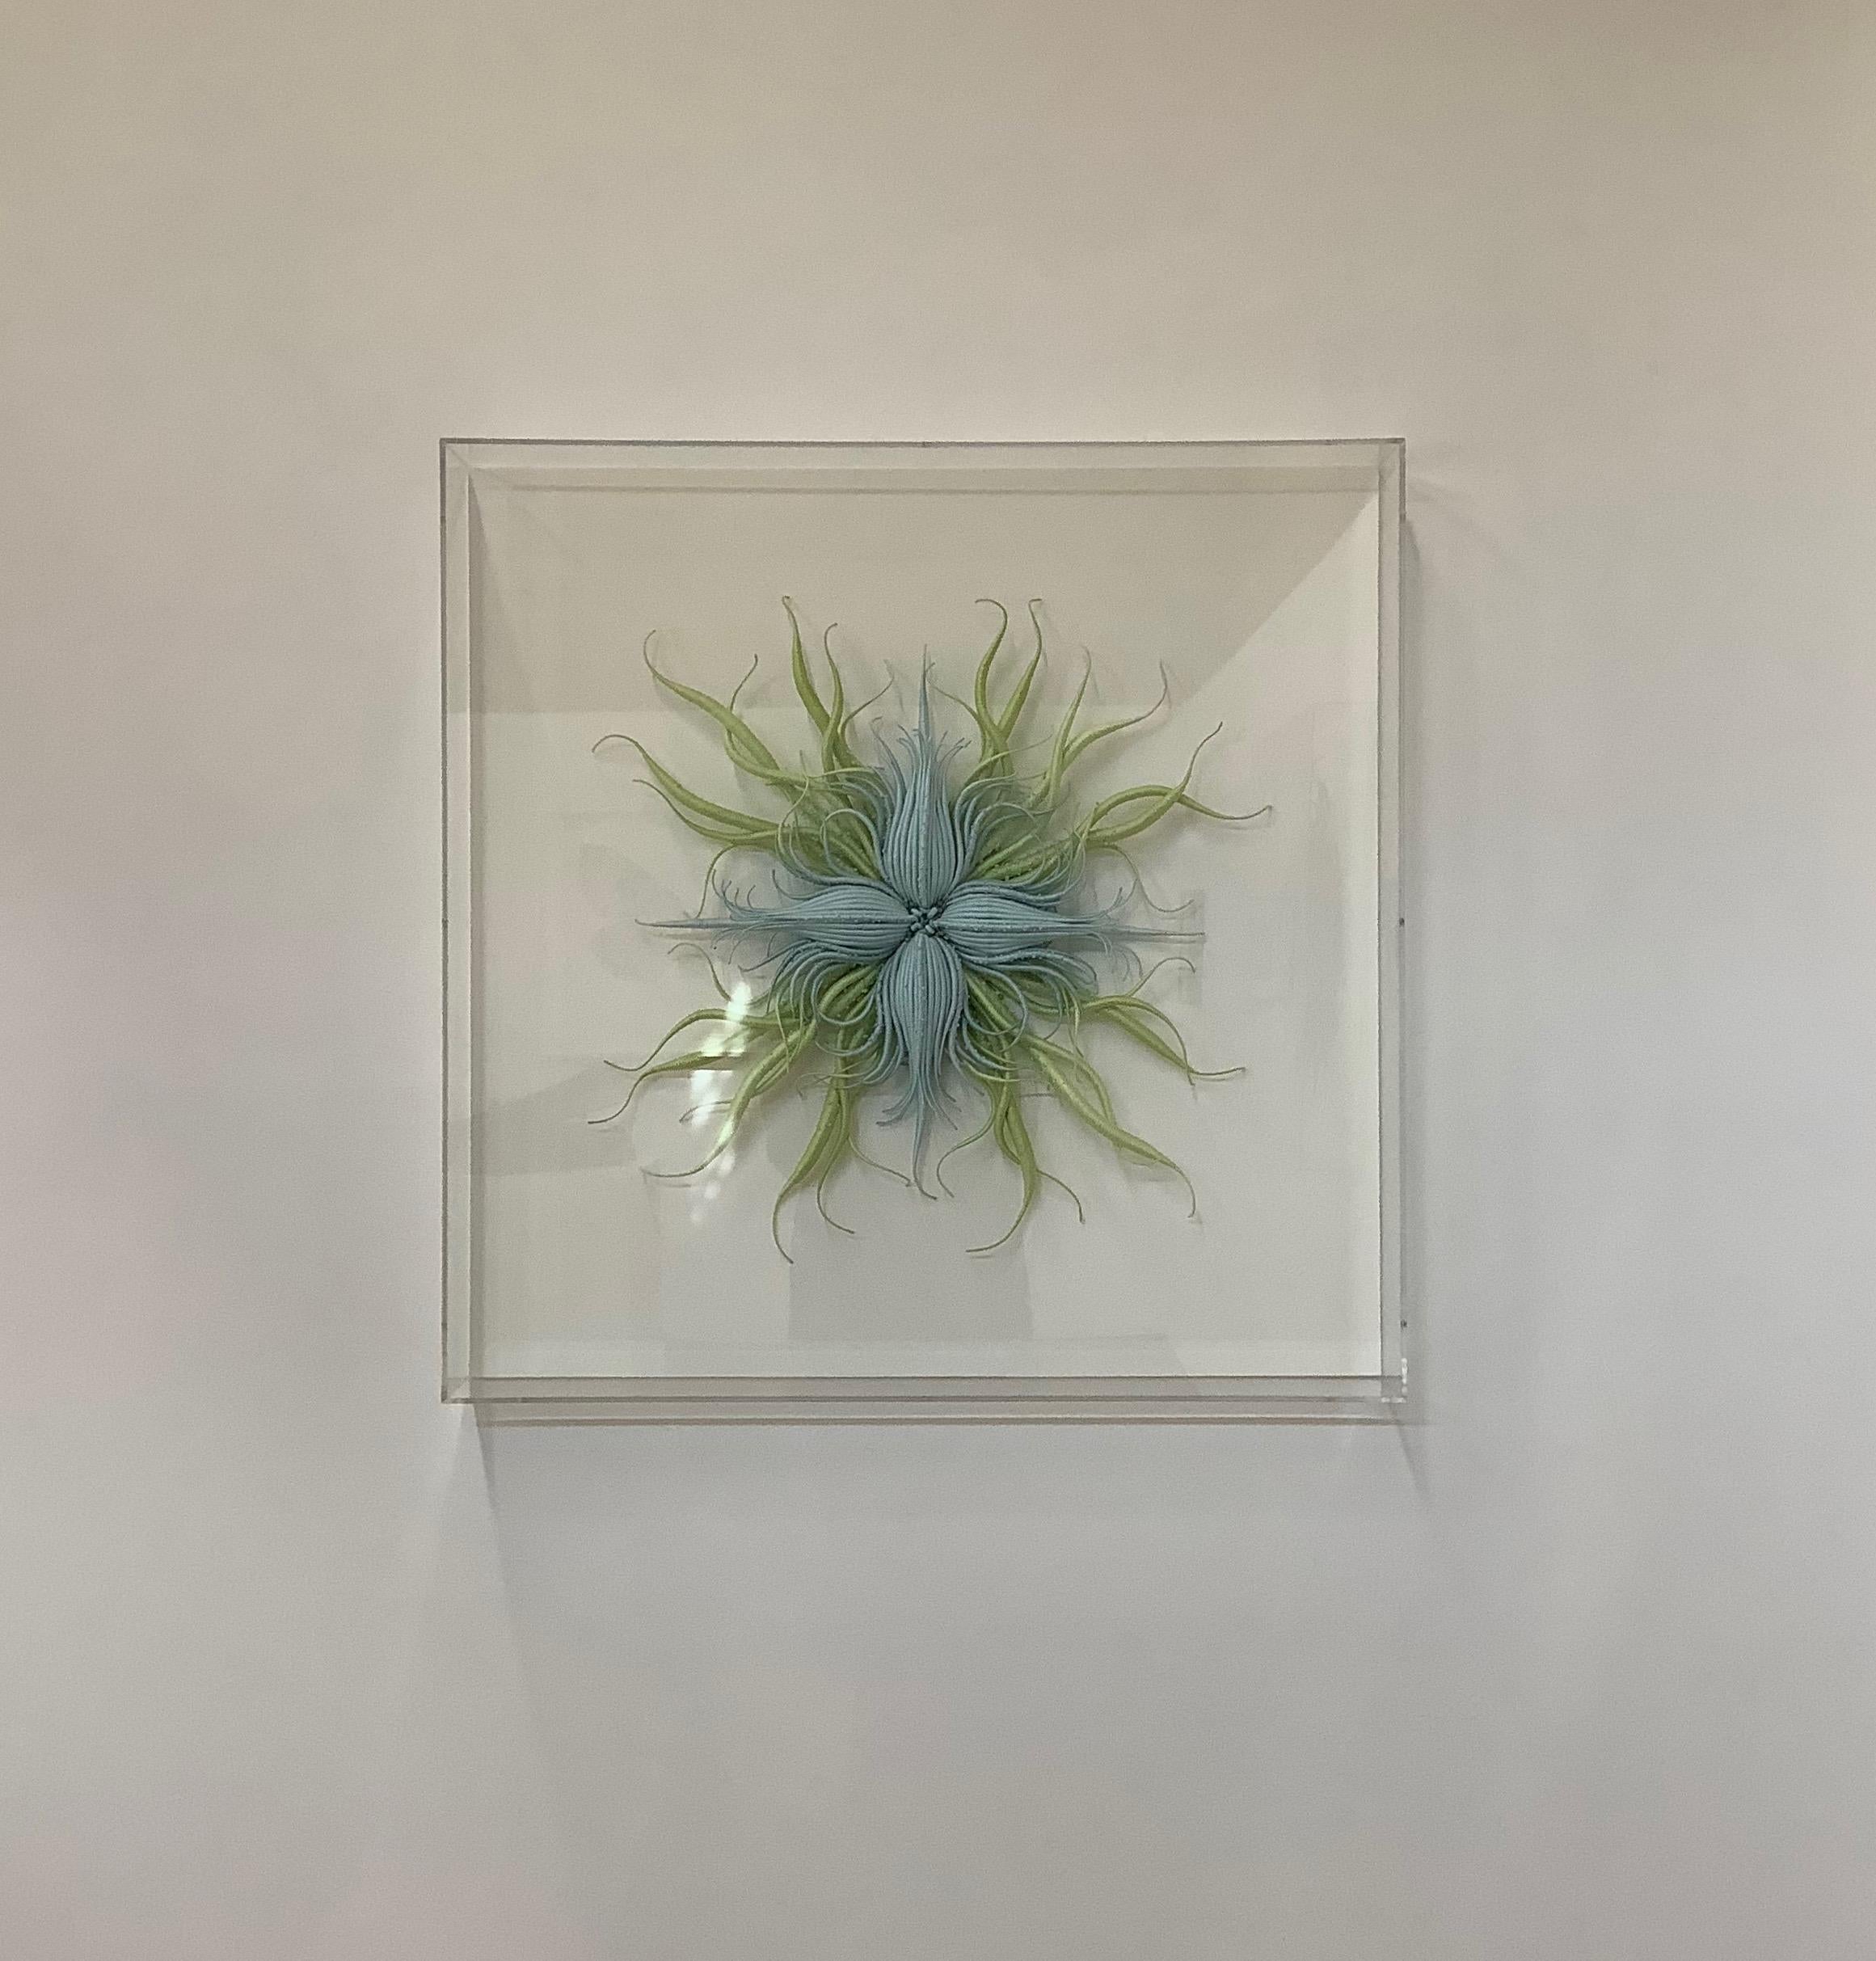 Framed in a clear acrylic shadowbox, Catherine Latson's Specimen 20 reads as an artistic rendition of a beautiful sea specimen. Luminous light blue hand-dyed cotton thread is wrapped around tendrils that stretch from a delicate cluster of tiny curls